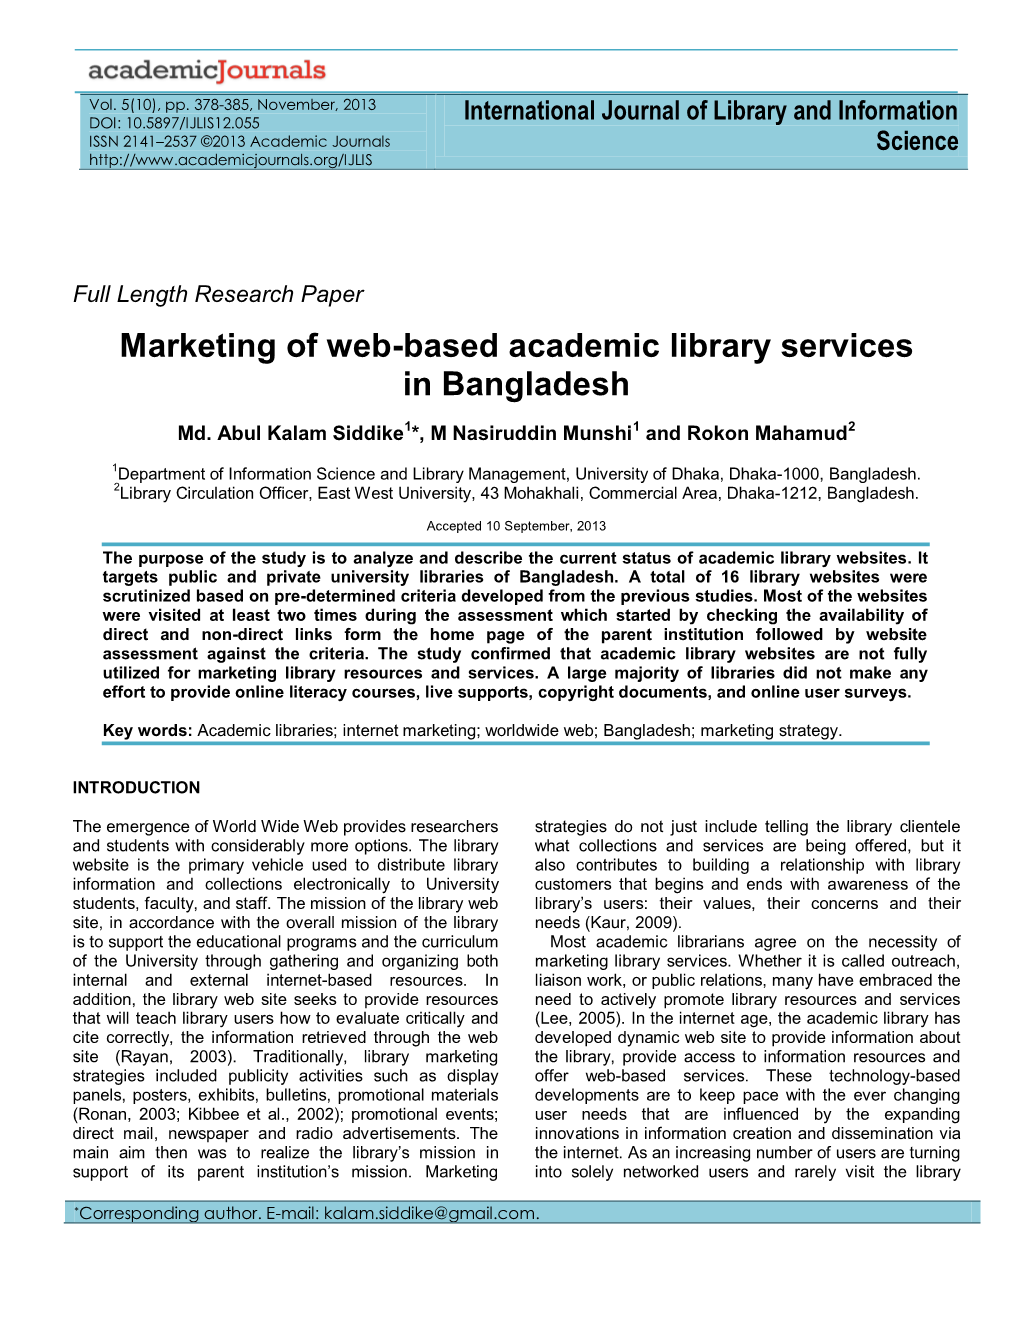 Marketing of Web-Based Academic Library Services in Bangladesh